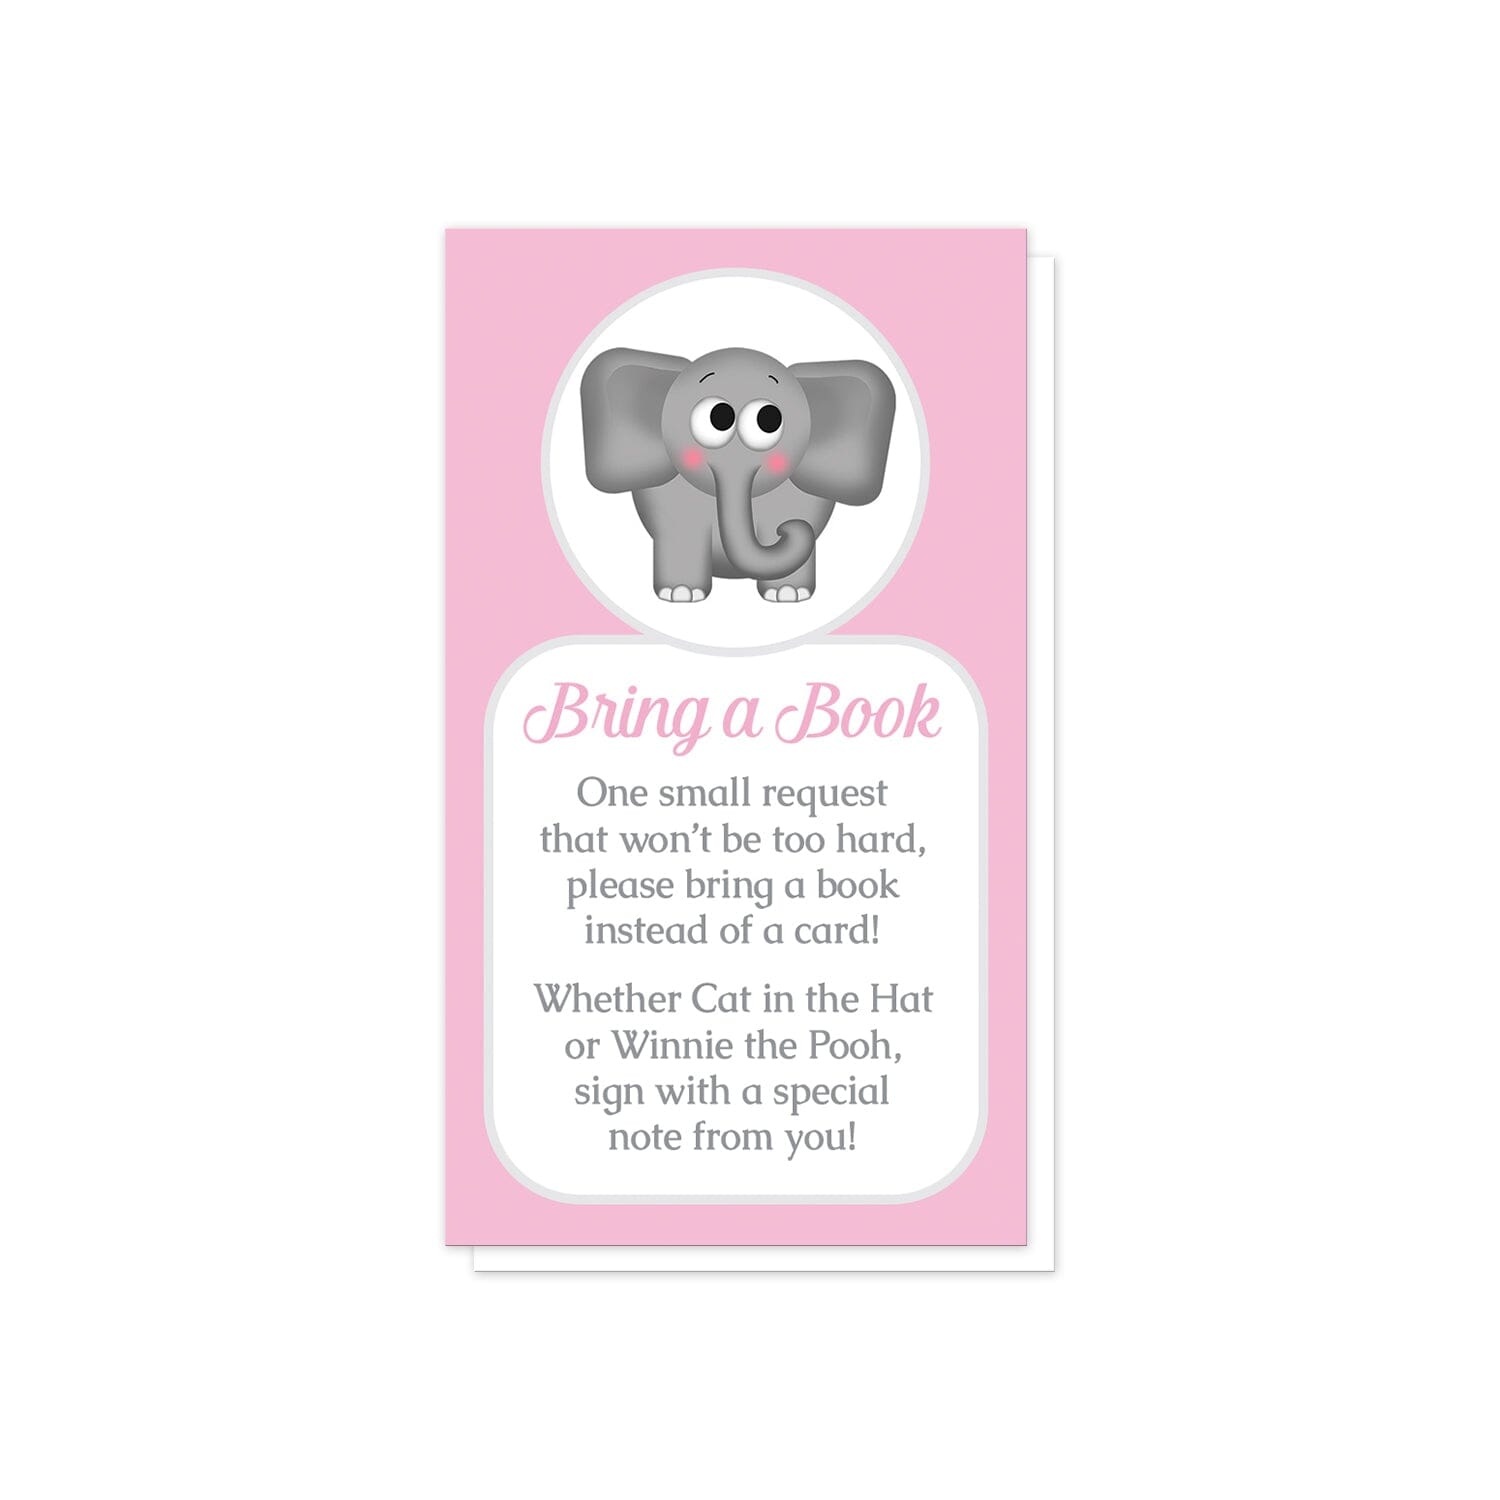 Cute Elephant Pink Bring a Book Cards at Artistically Invited. Cute elephant pink bring a book cards illustrated with an affectionate and adorable gray elephant in a white circle over a pink background color. Your book request details are printed in pink and gray in a white rectangular area below the cute little elephant.